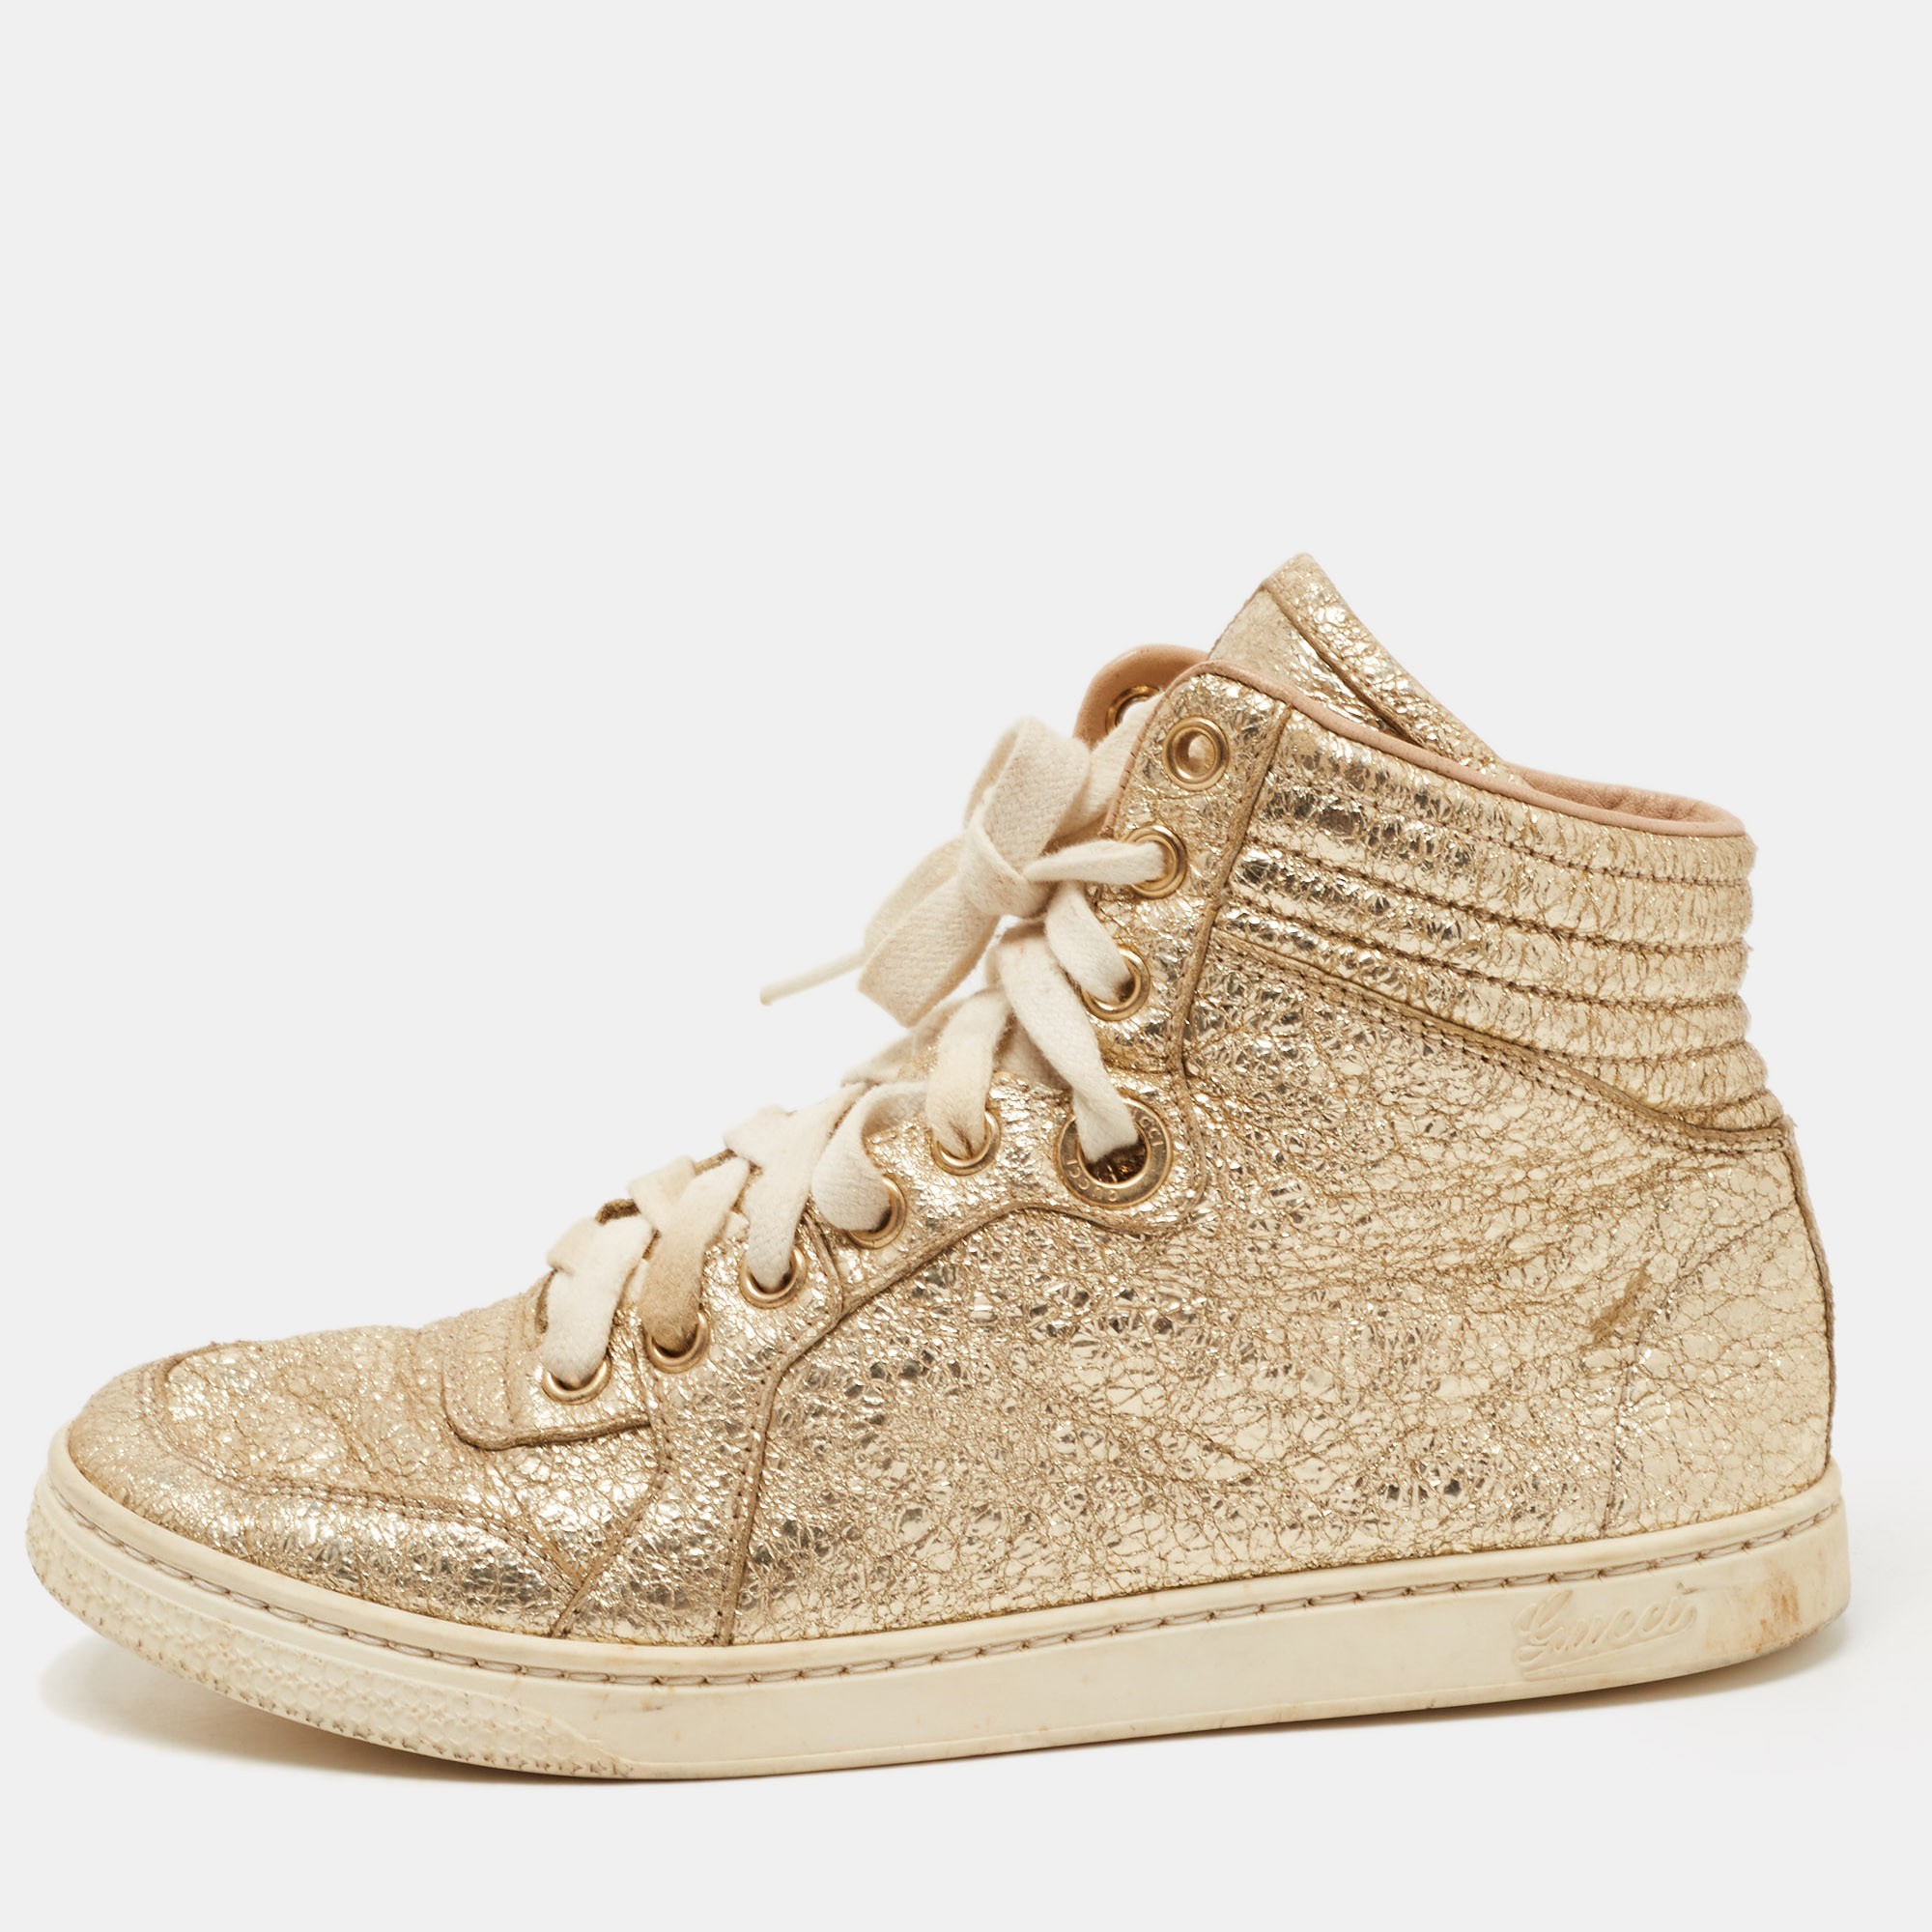 Gucci Gold Leather High Top Sneakers Size 35